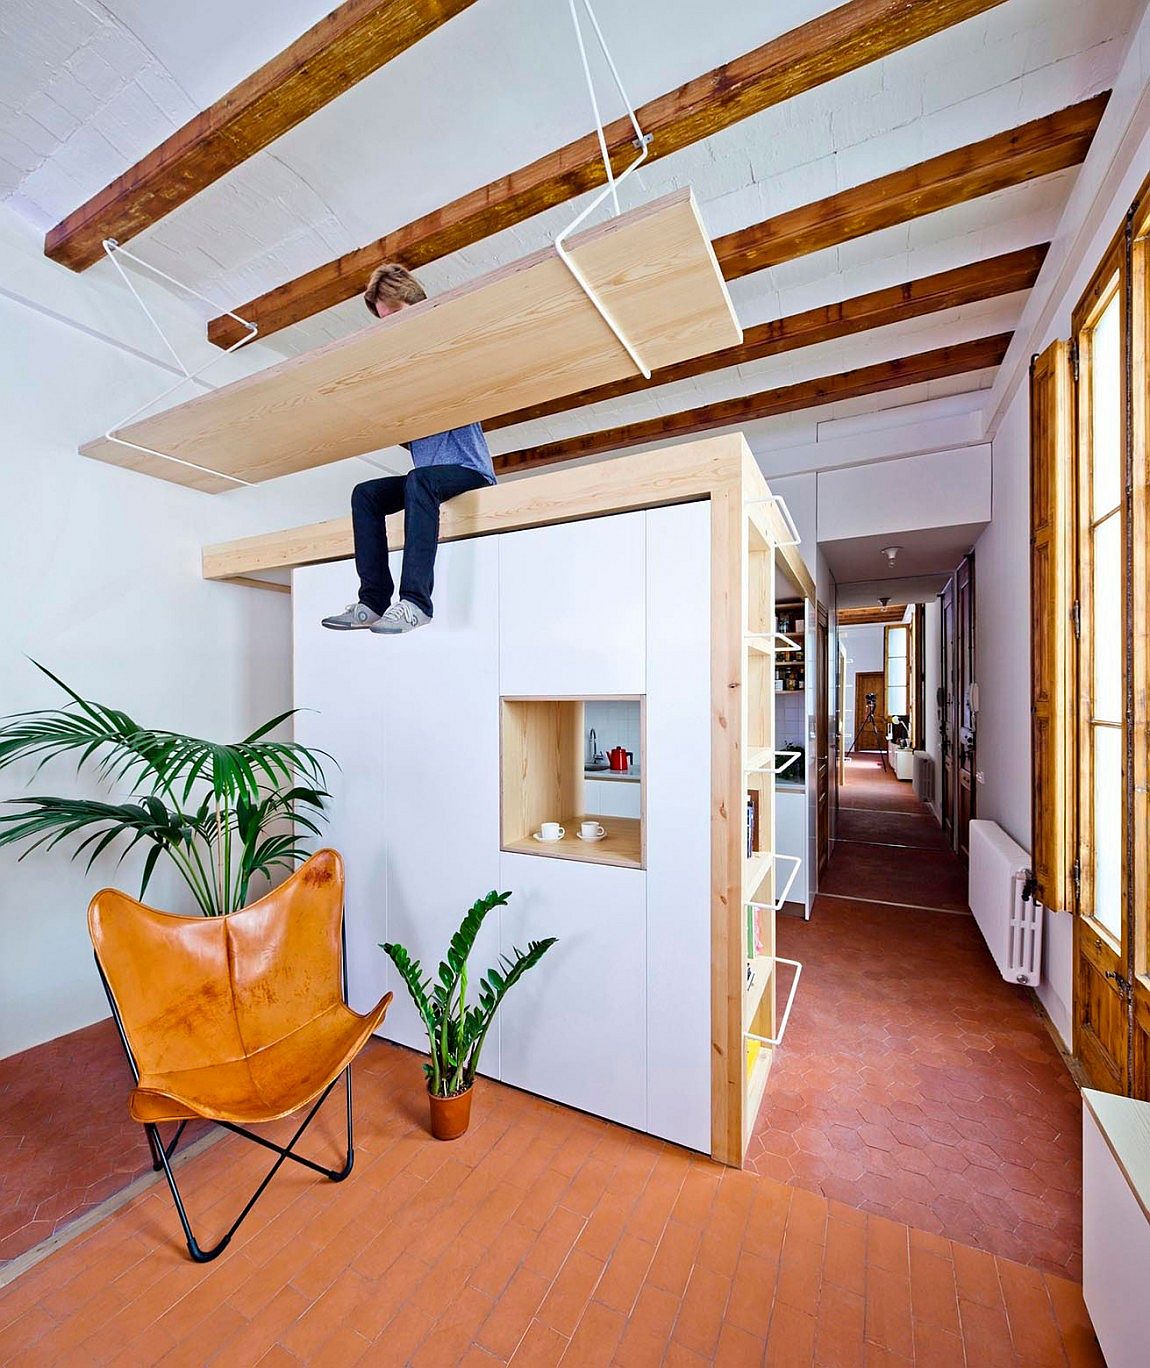 Mezzanine-level-above-the-kitchen-in-this-living-room-serves-as-a-smart-study